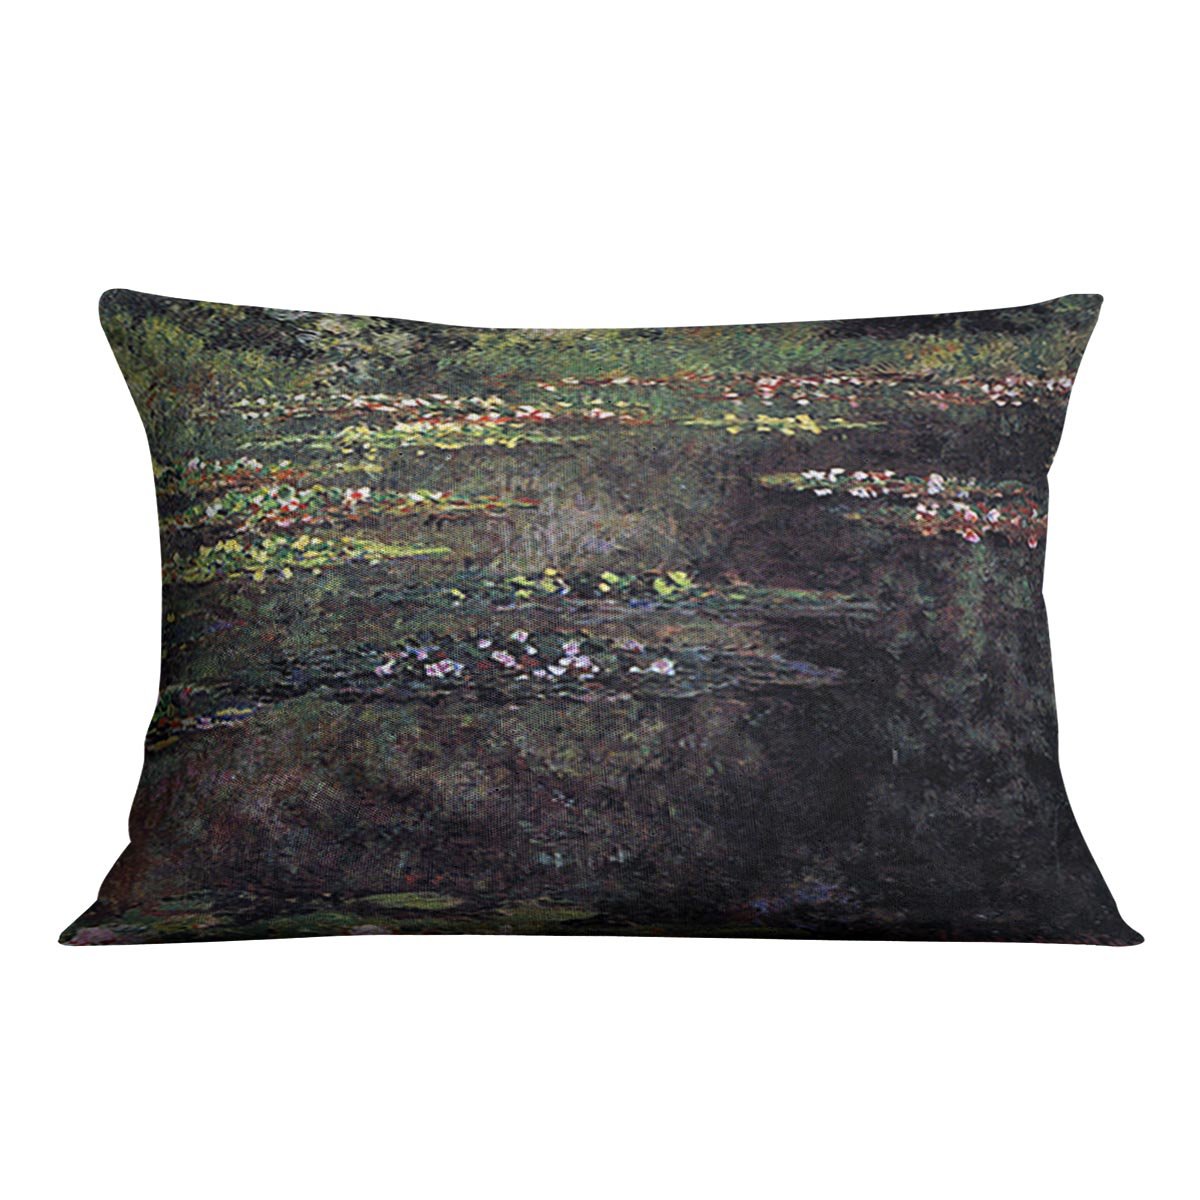 Water lilies water landscape 5 by Monet Throw Pillow